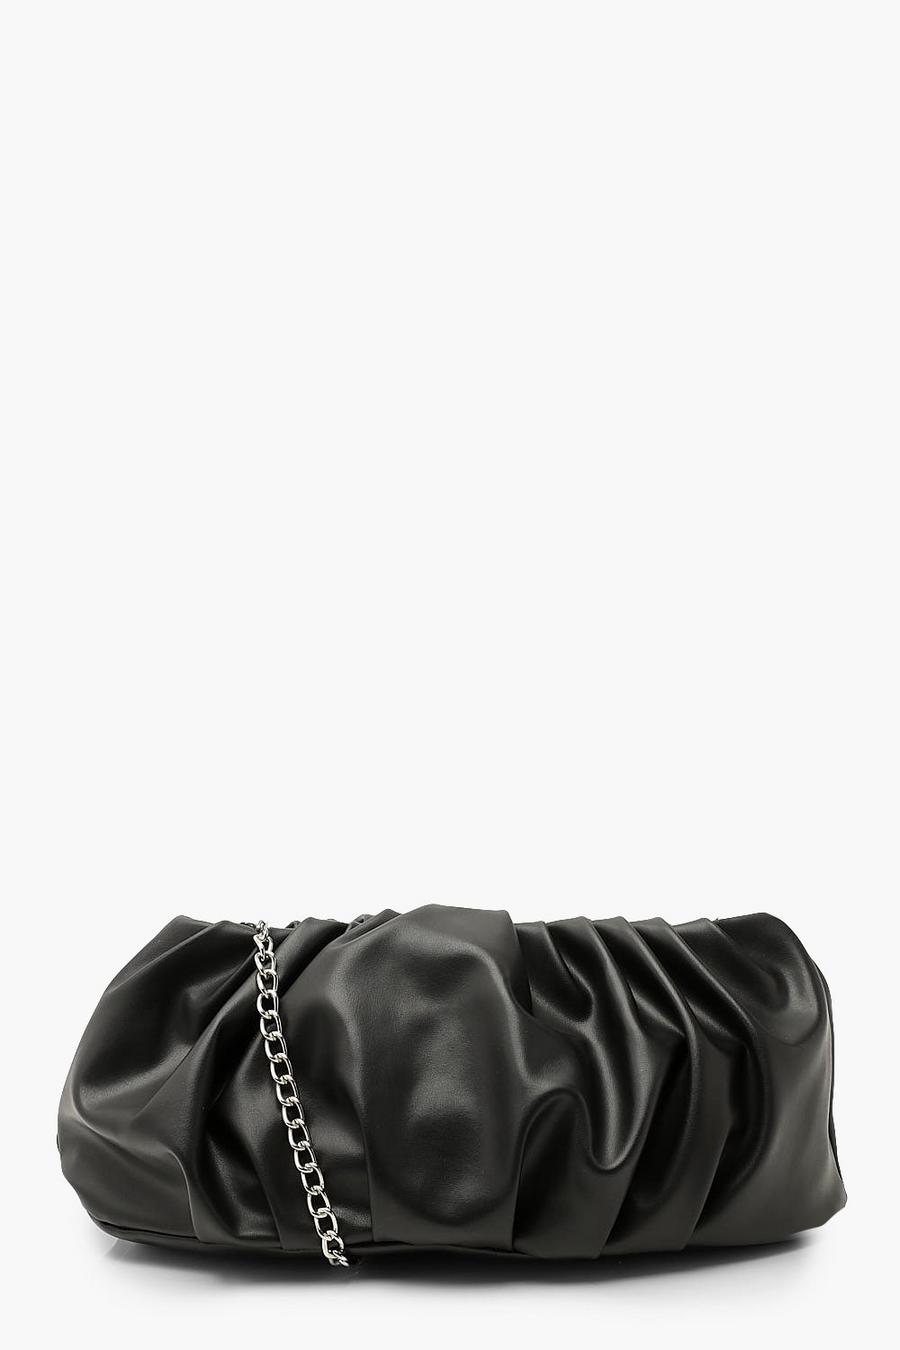 Black Oversized Slouchy Gathered Clutch Bag image number 1